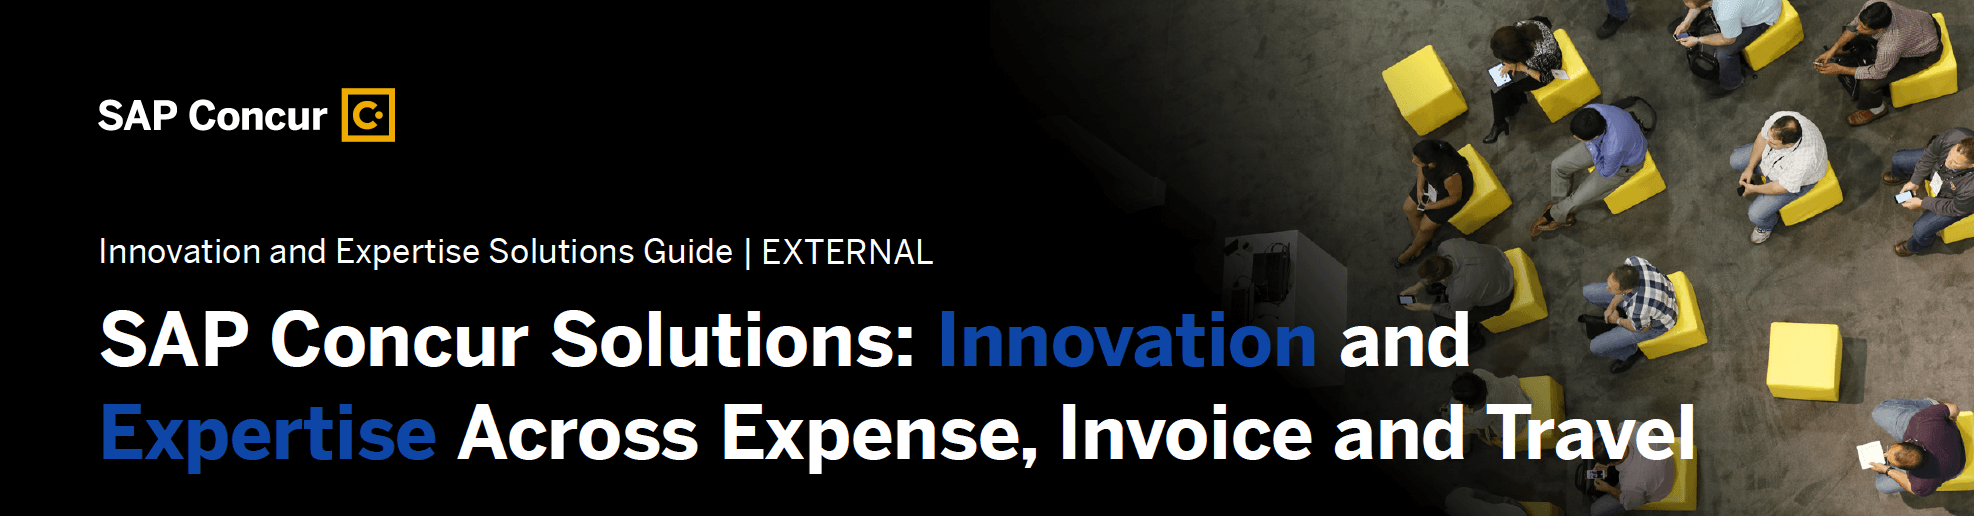 SAP Concur Solutions: Innovation and Expertise Across Expense, Invoice and Travel